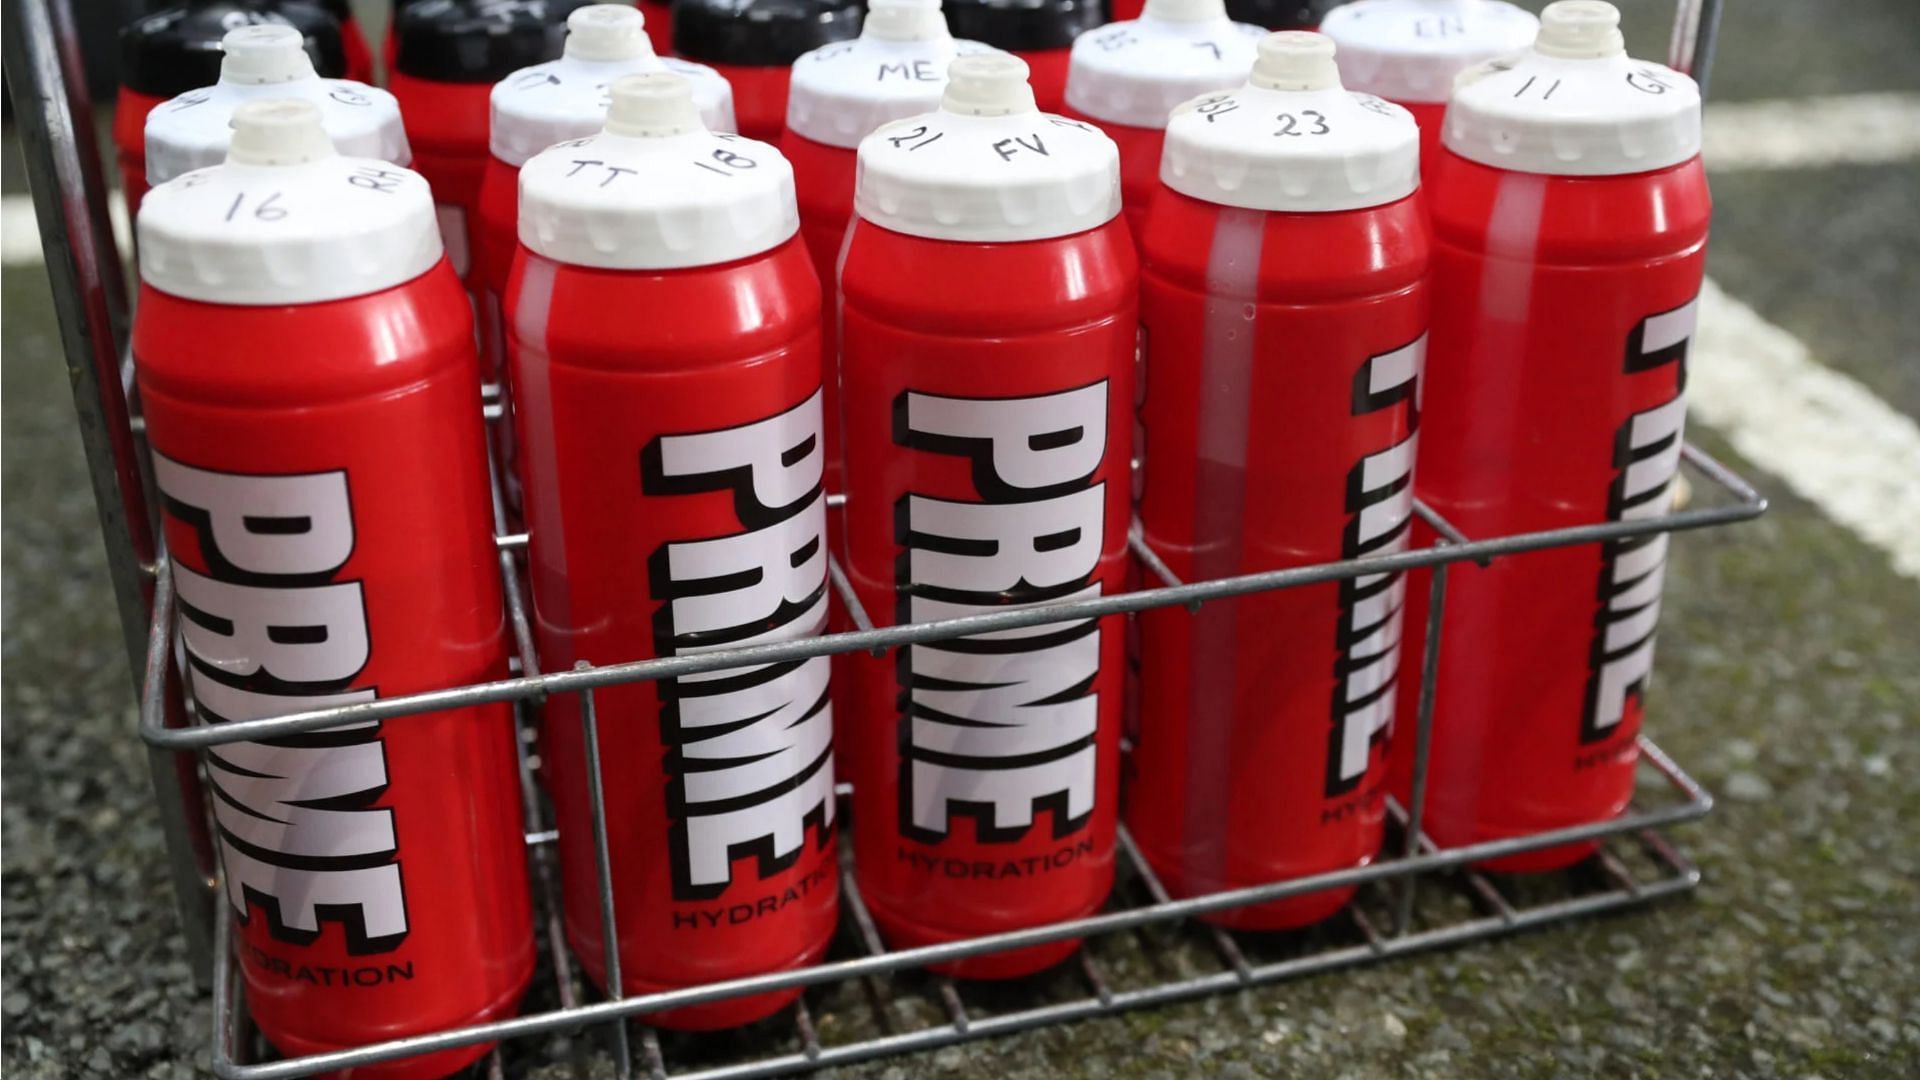 several schools across the country have banned Prime energy drinks (Image via Catherine Ivill/Getty Images)